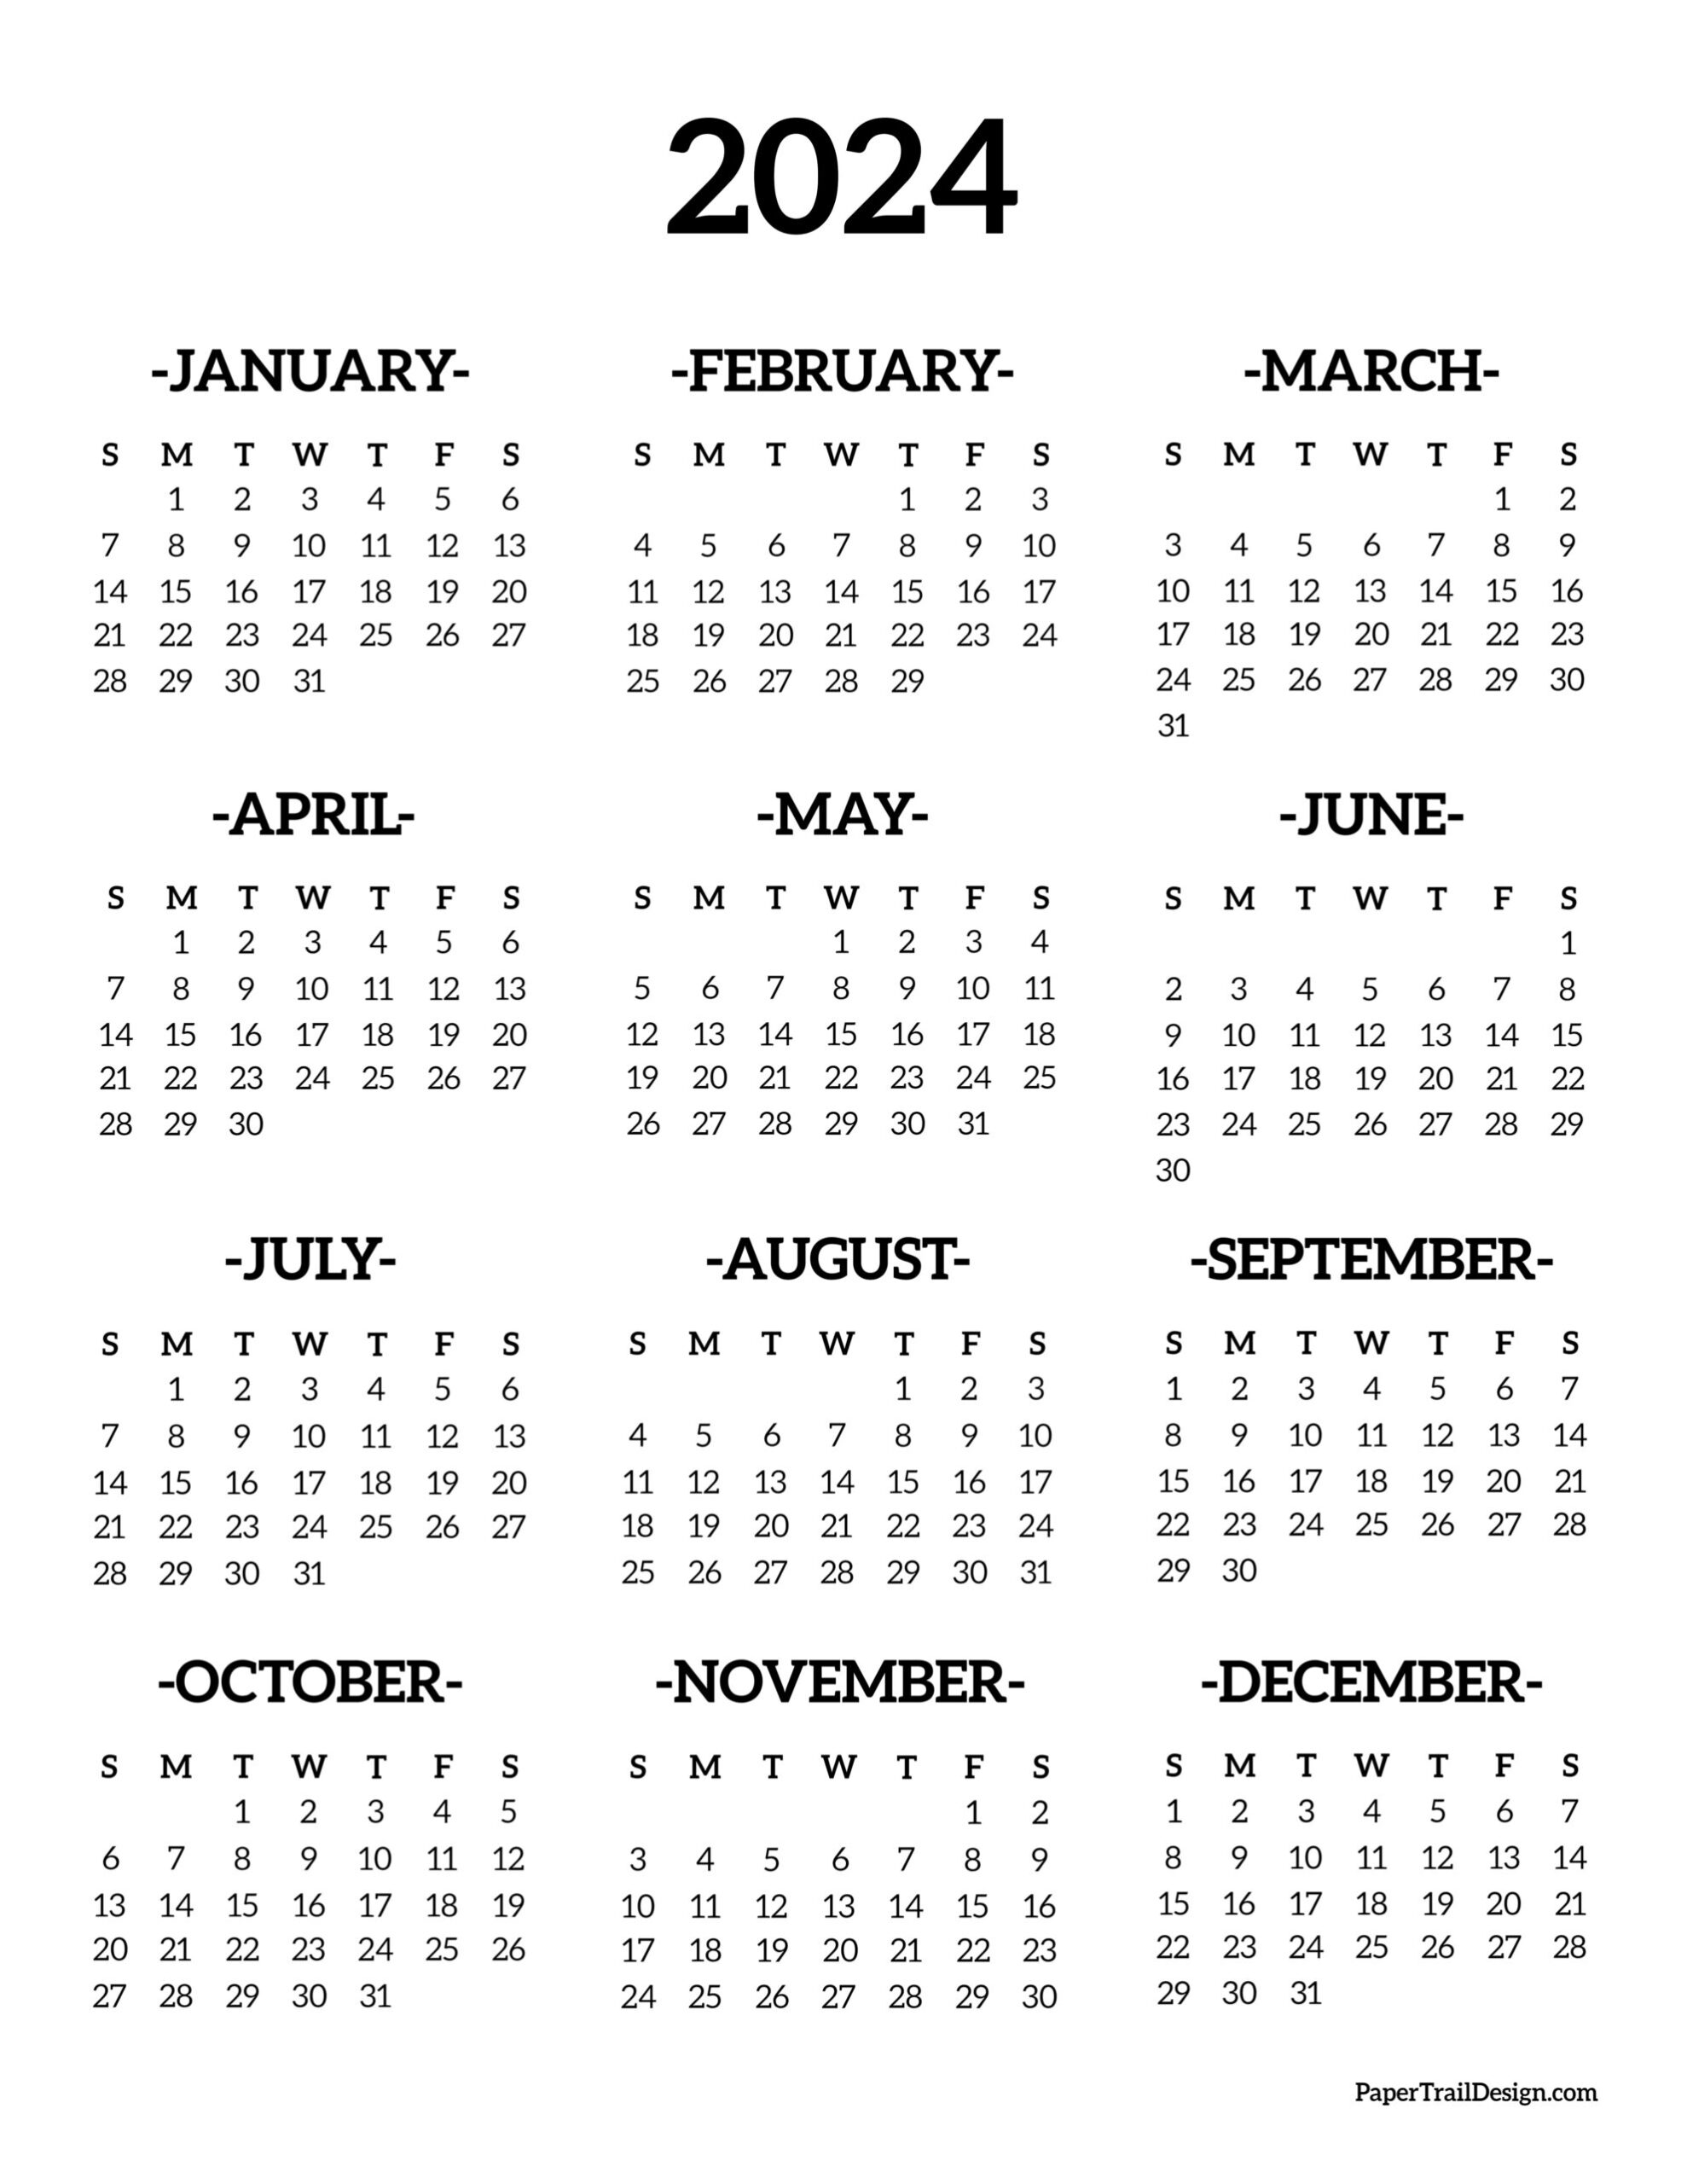 Calendar 2024 Printable One Page - Paper Trail Design for Printable Wall Calendar 2024 Free